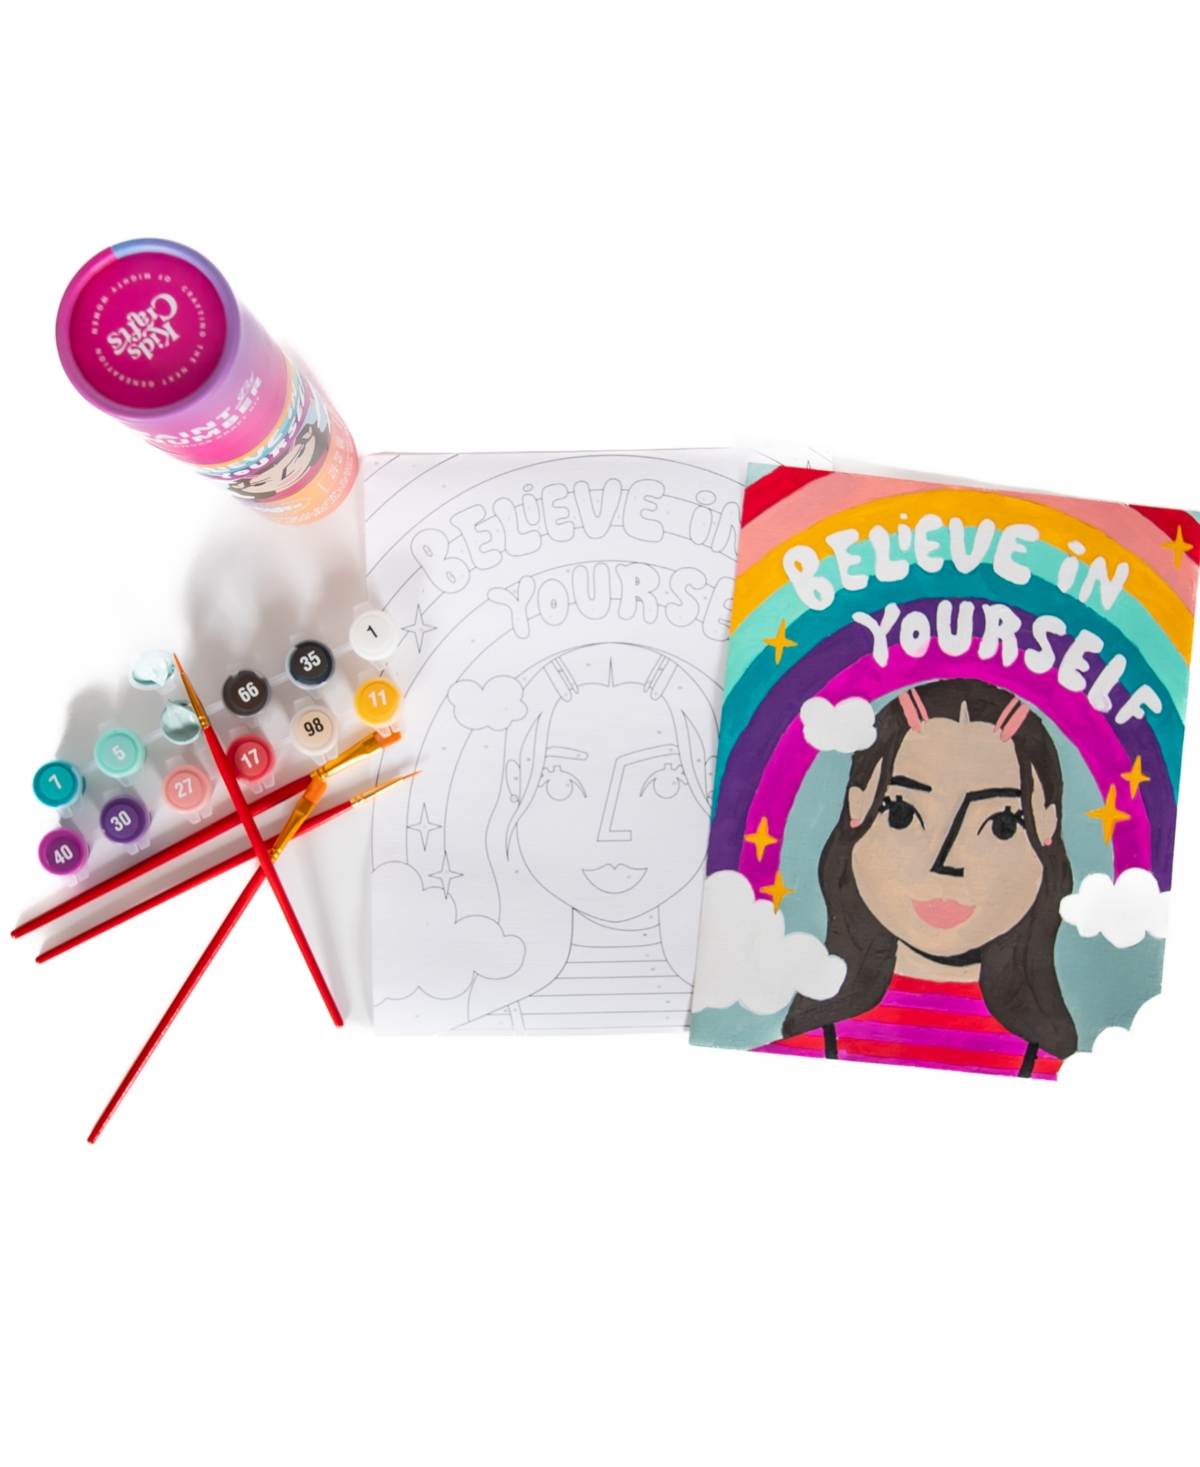 Kids Crafts Kids' Believe In Yourself Paint By Number Craft Kit In Vibrant Colors